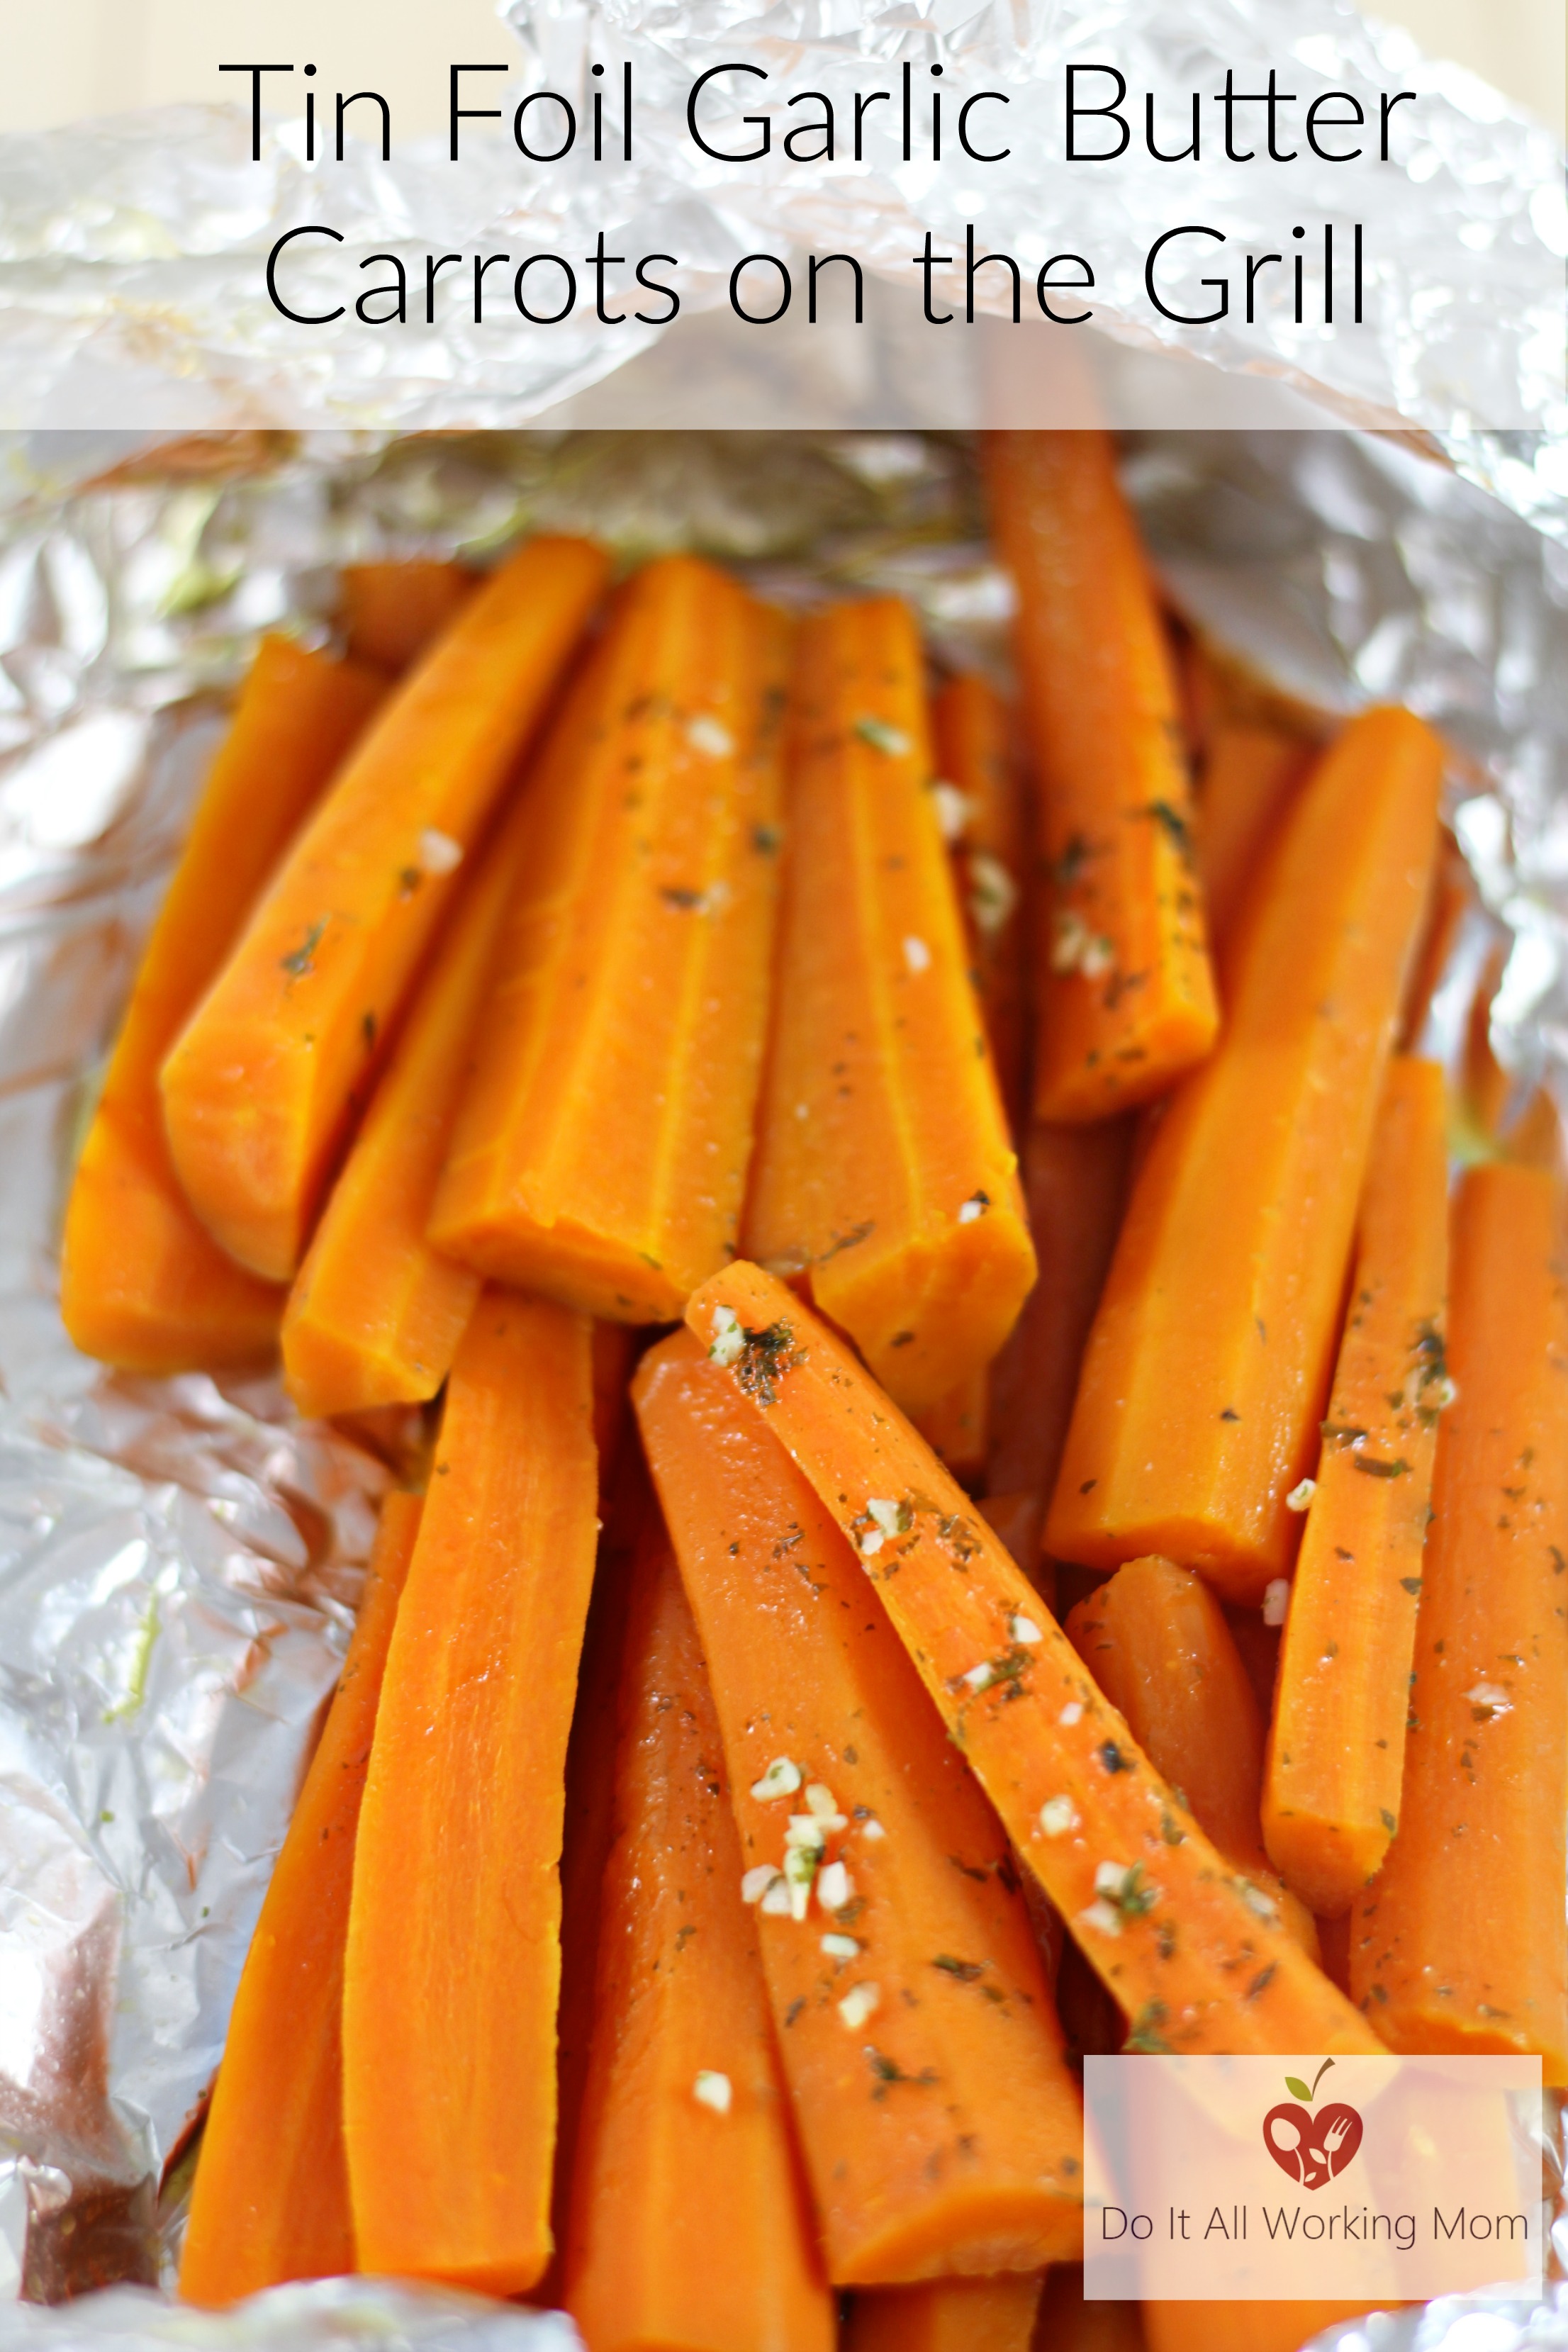 Tin Foil Garlic Butter Carrots on the Grill